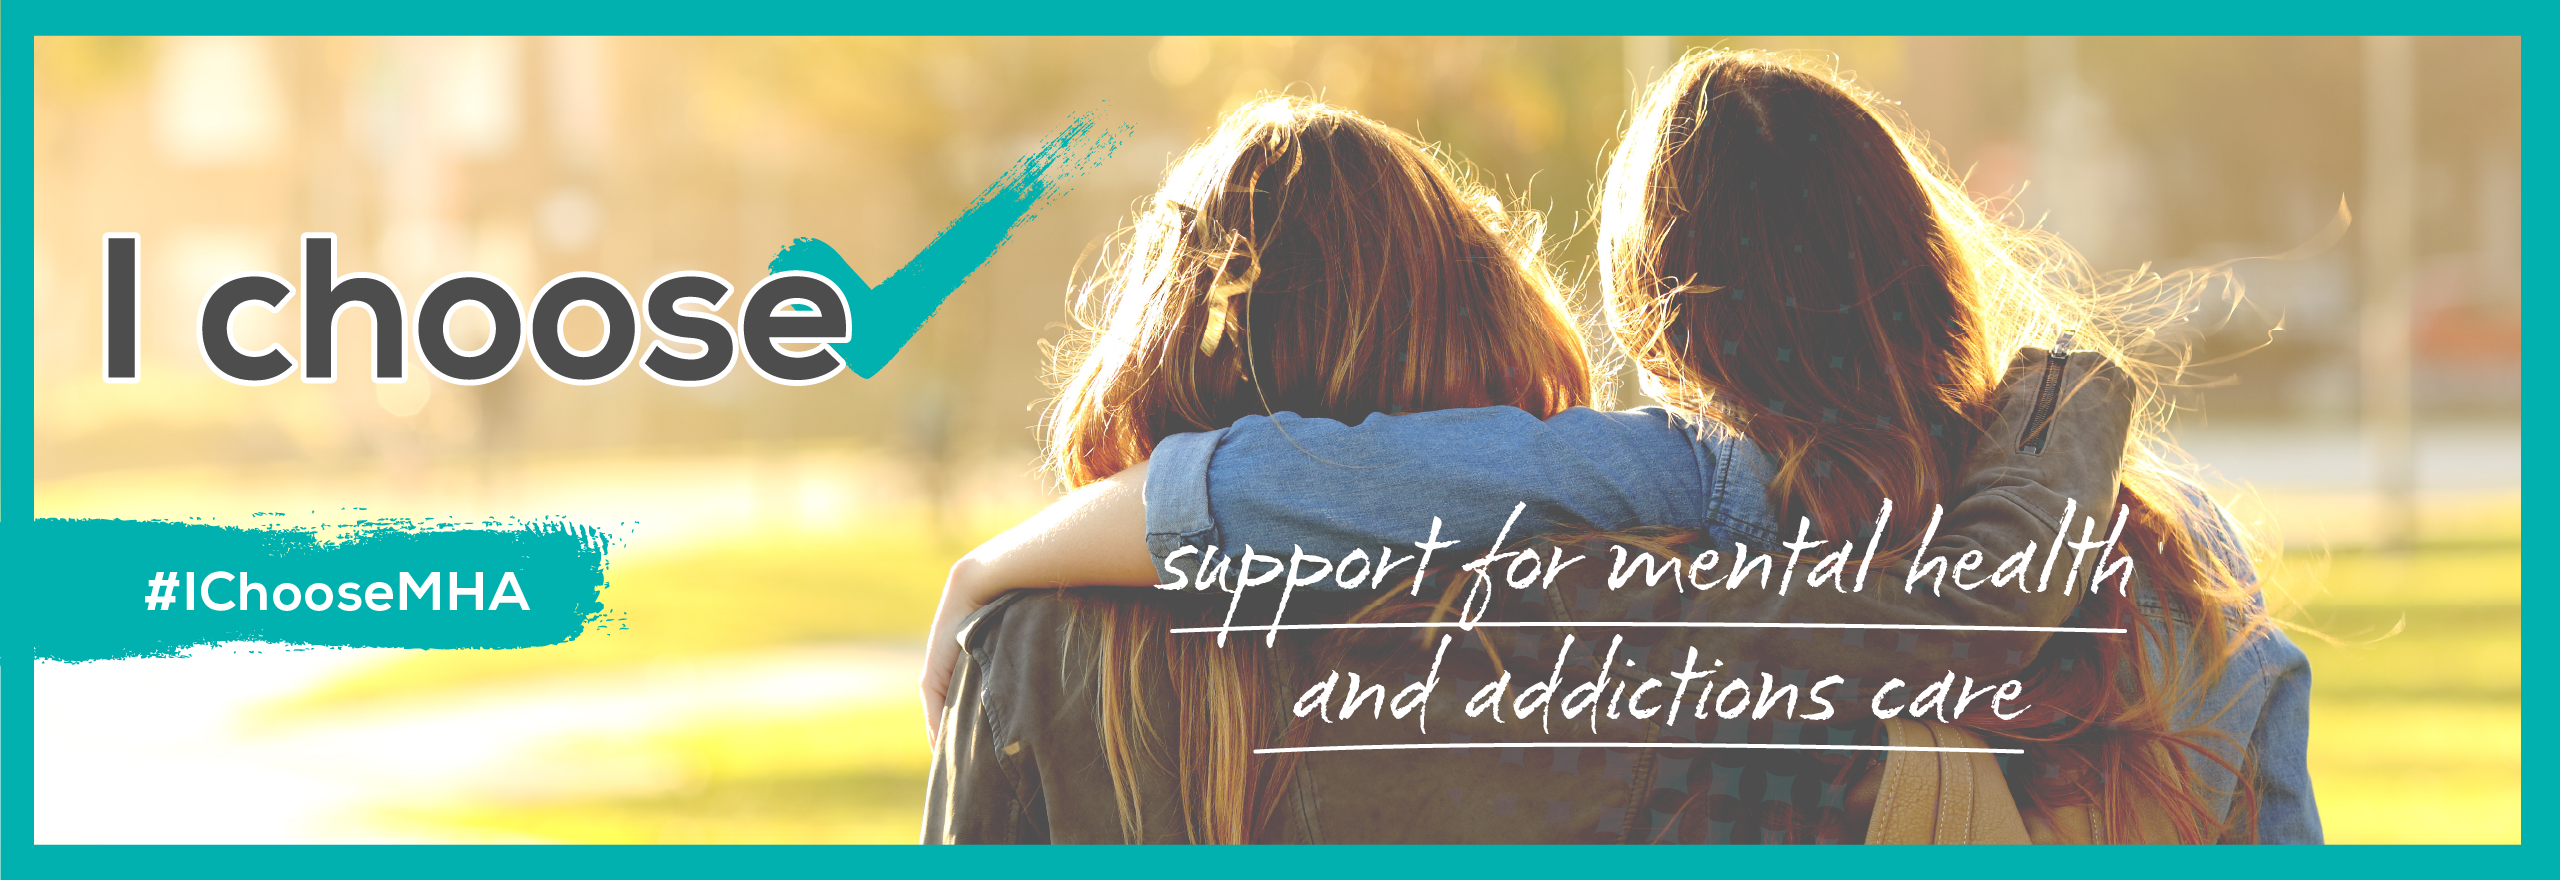 Supporting mental health, addiction workers strengthens care for all Ontarians